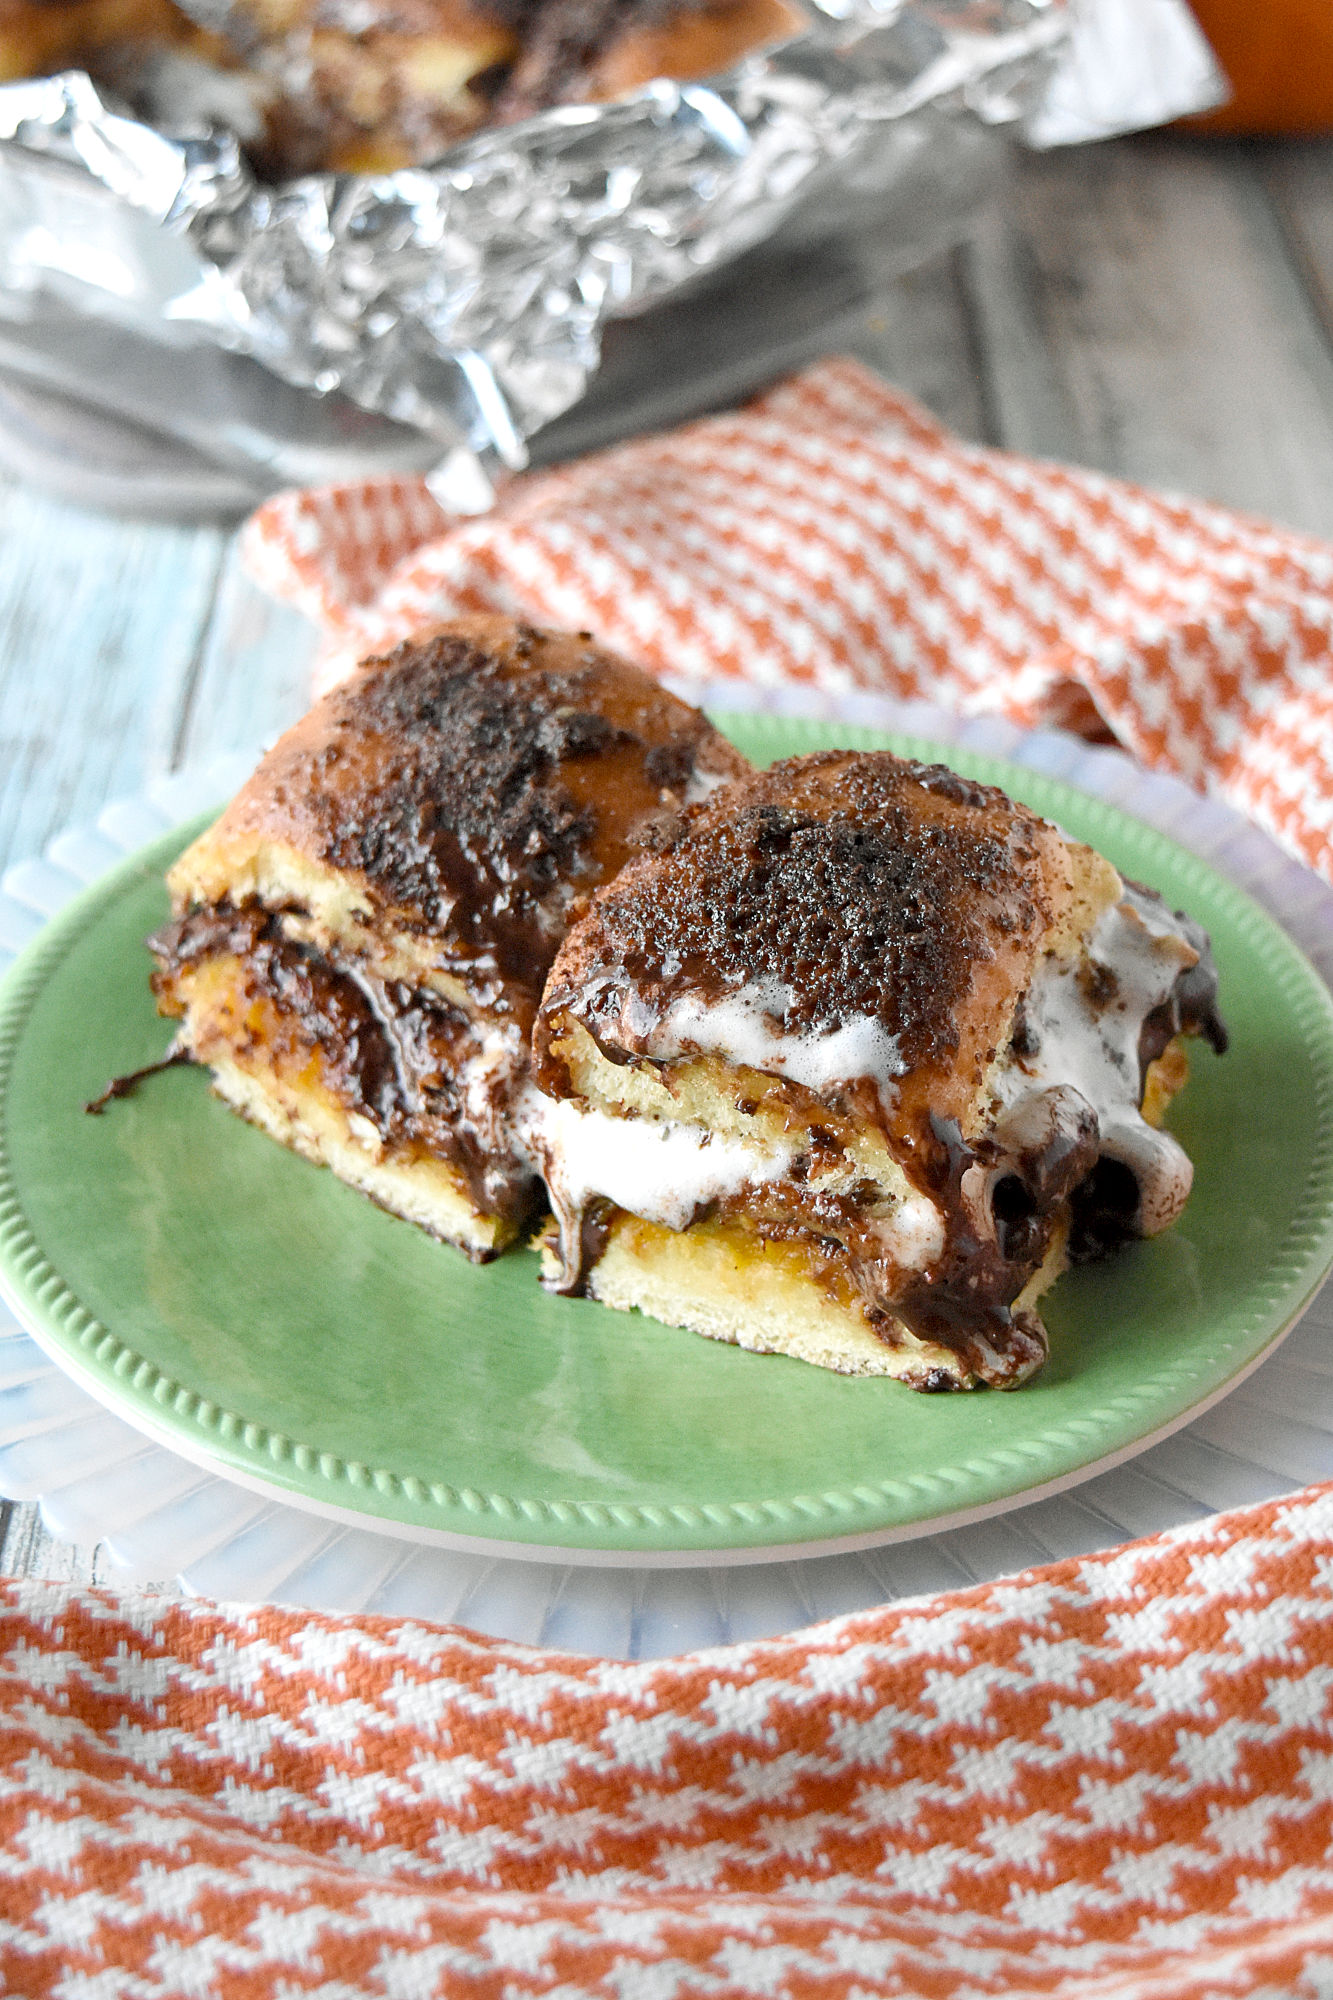 Pumpkin S'Mores Sliders are easy to make, are messy to eat, and taste perfectly delicious.  The combination of the spiced pumpkin, chocolate, pecans, and caramel sauce are perfect with the sweet Hawaiian rolls. #PumpkinWeek